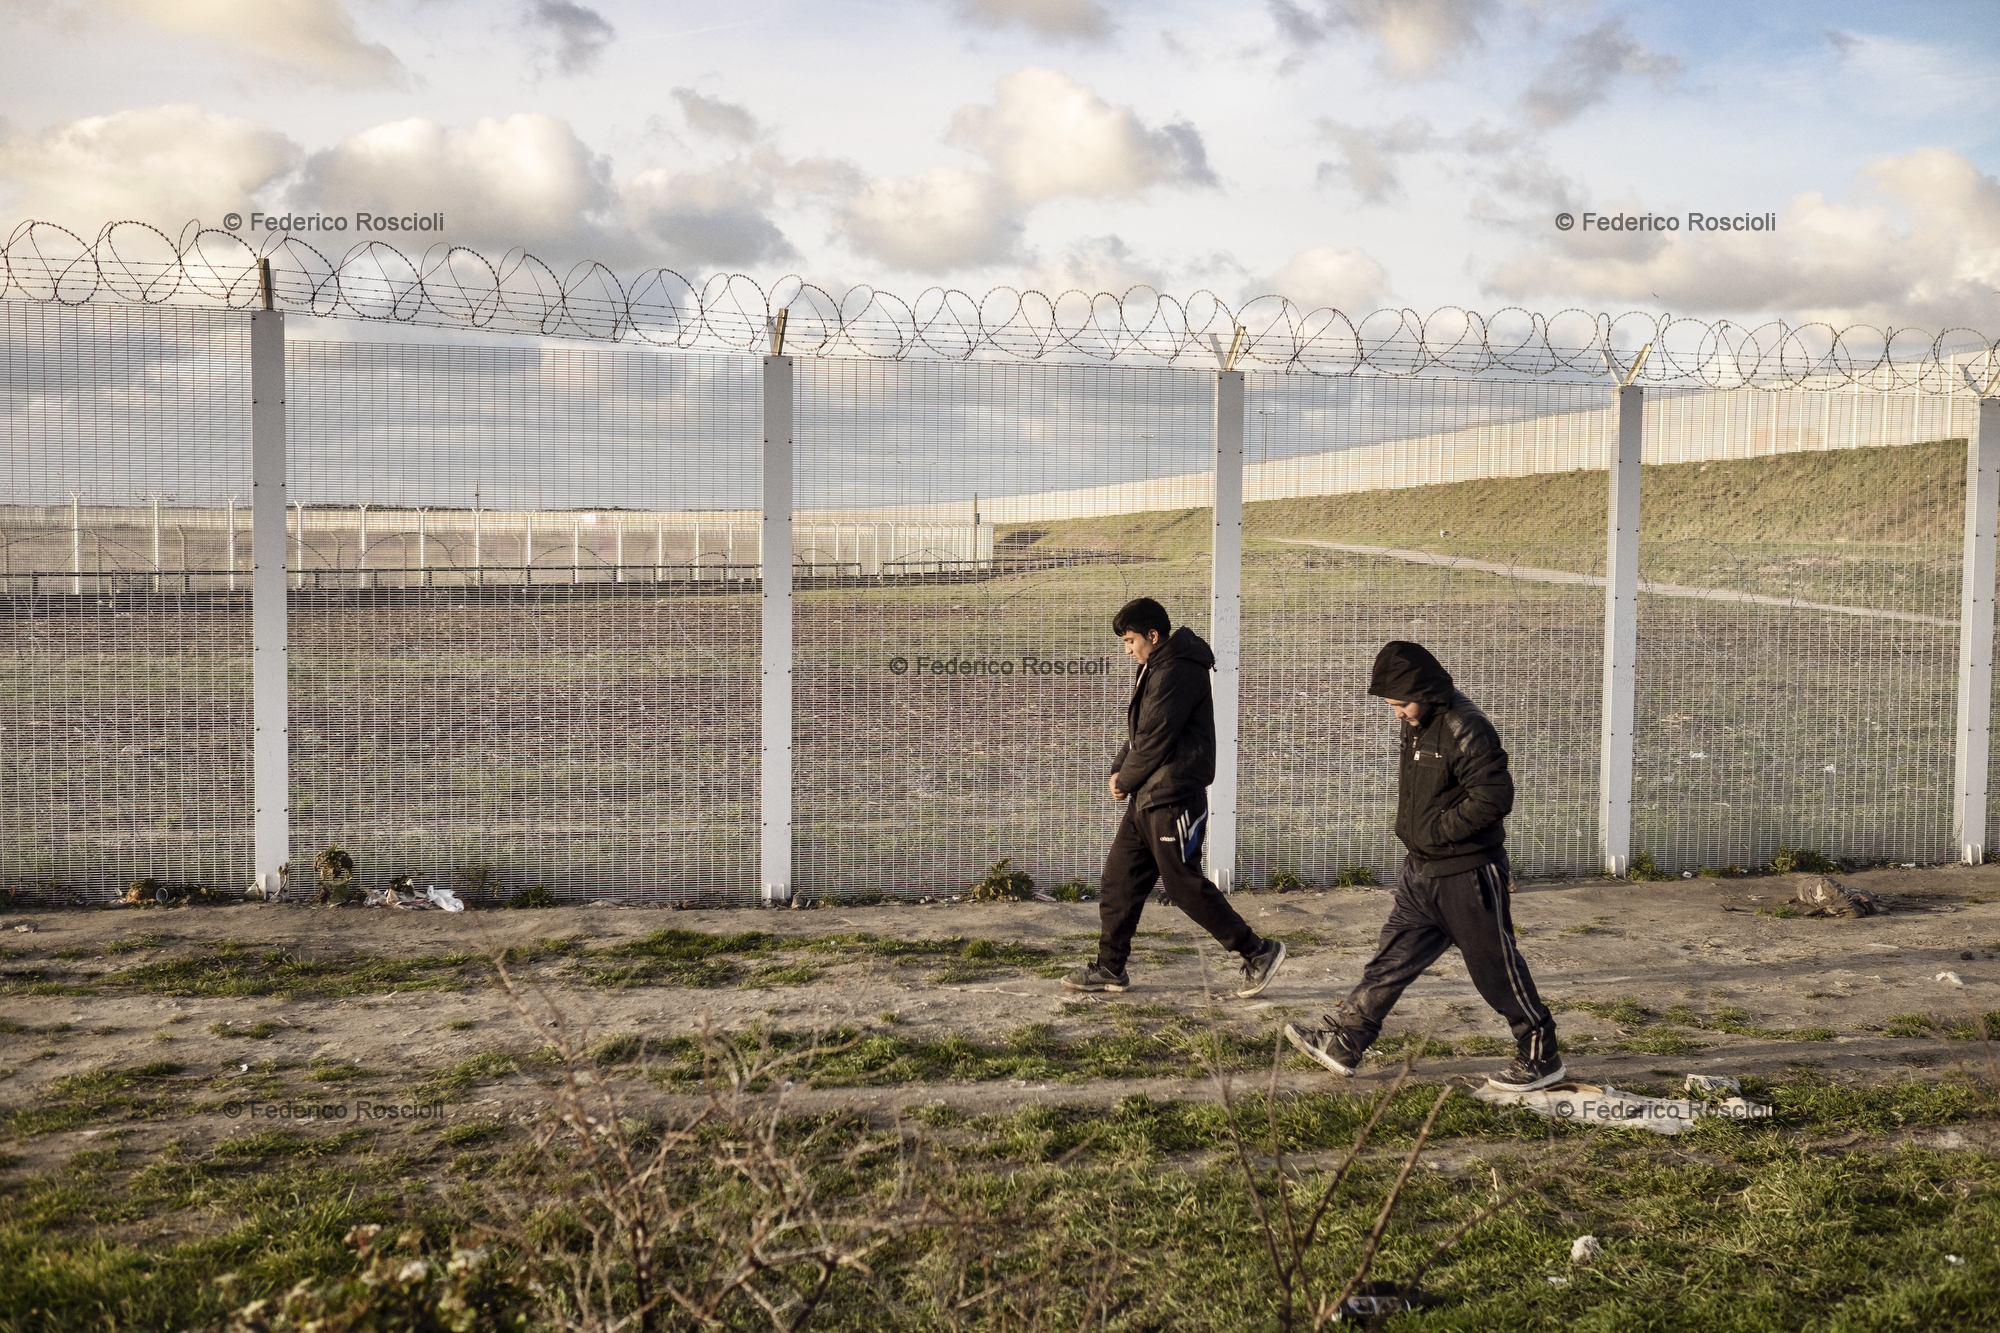 Calais, France. February 28, 2016. During evenings and nights migrants walk from the camp to the train station or the truck parking in order to 'try it', meaning try to reach the UK.